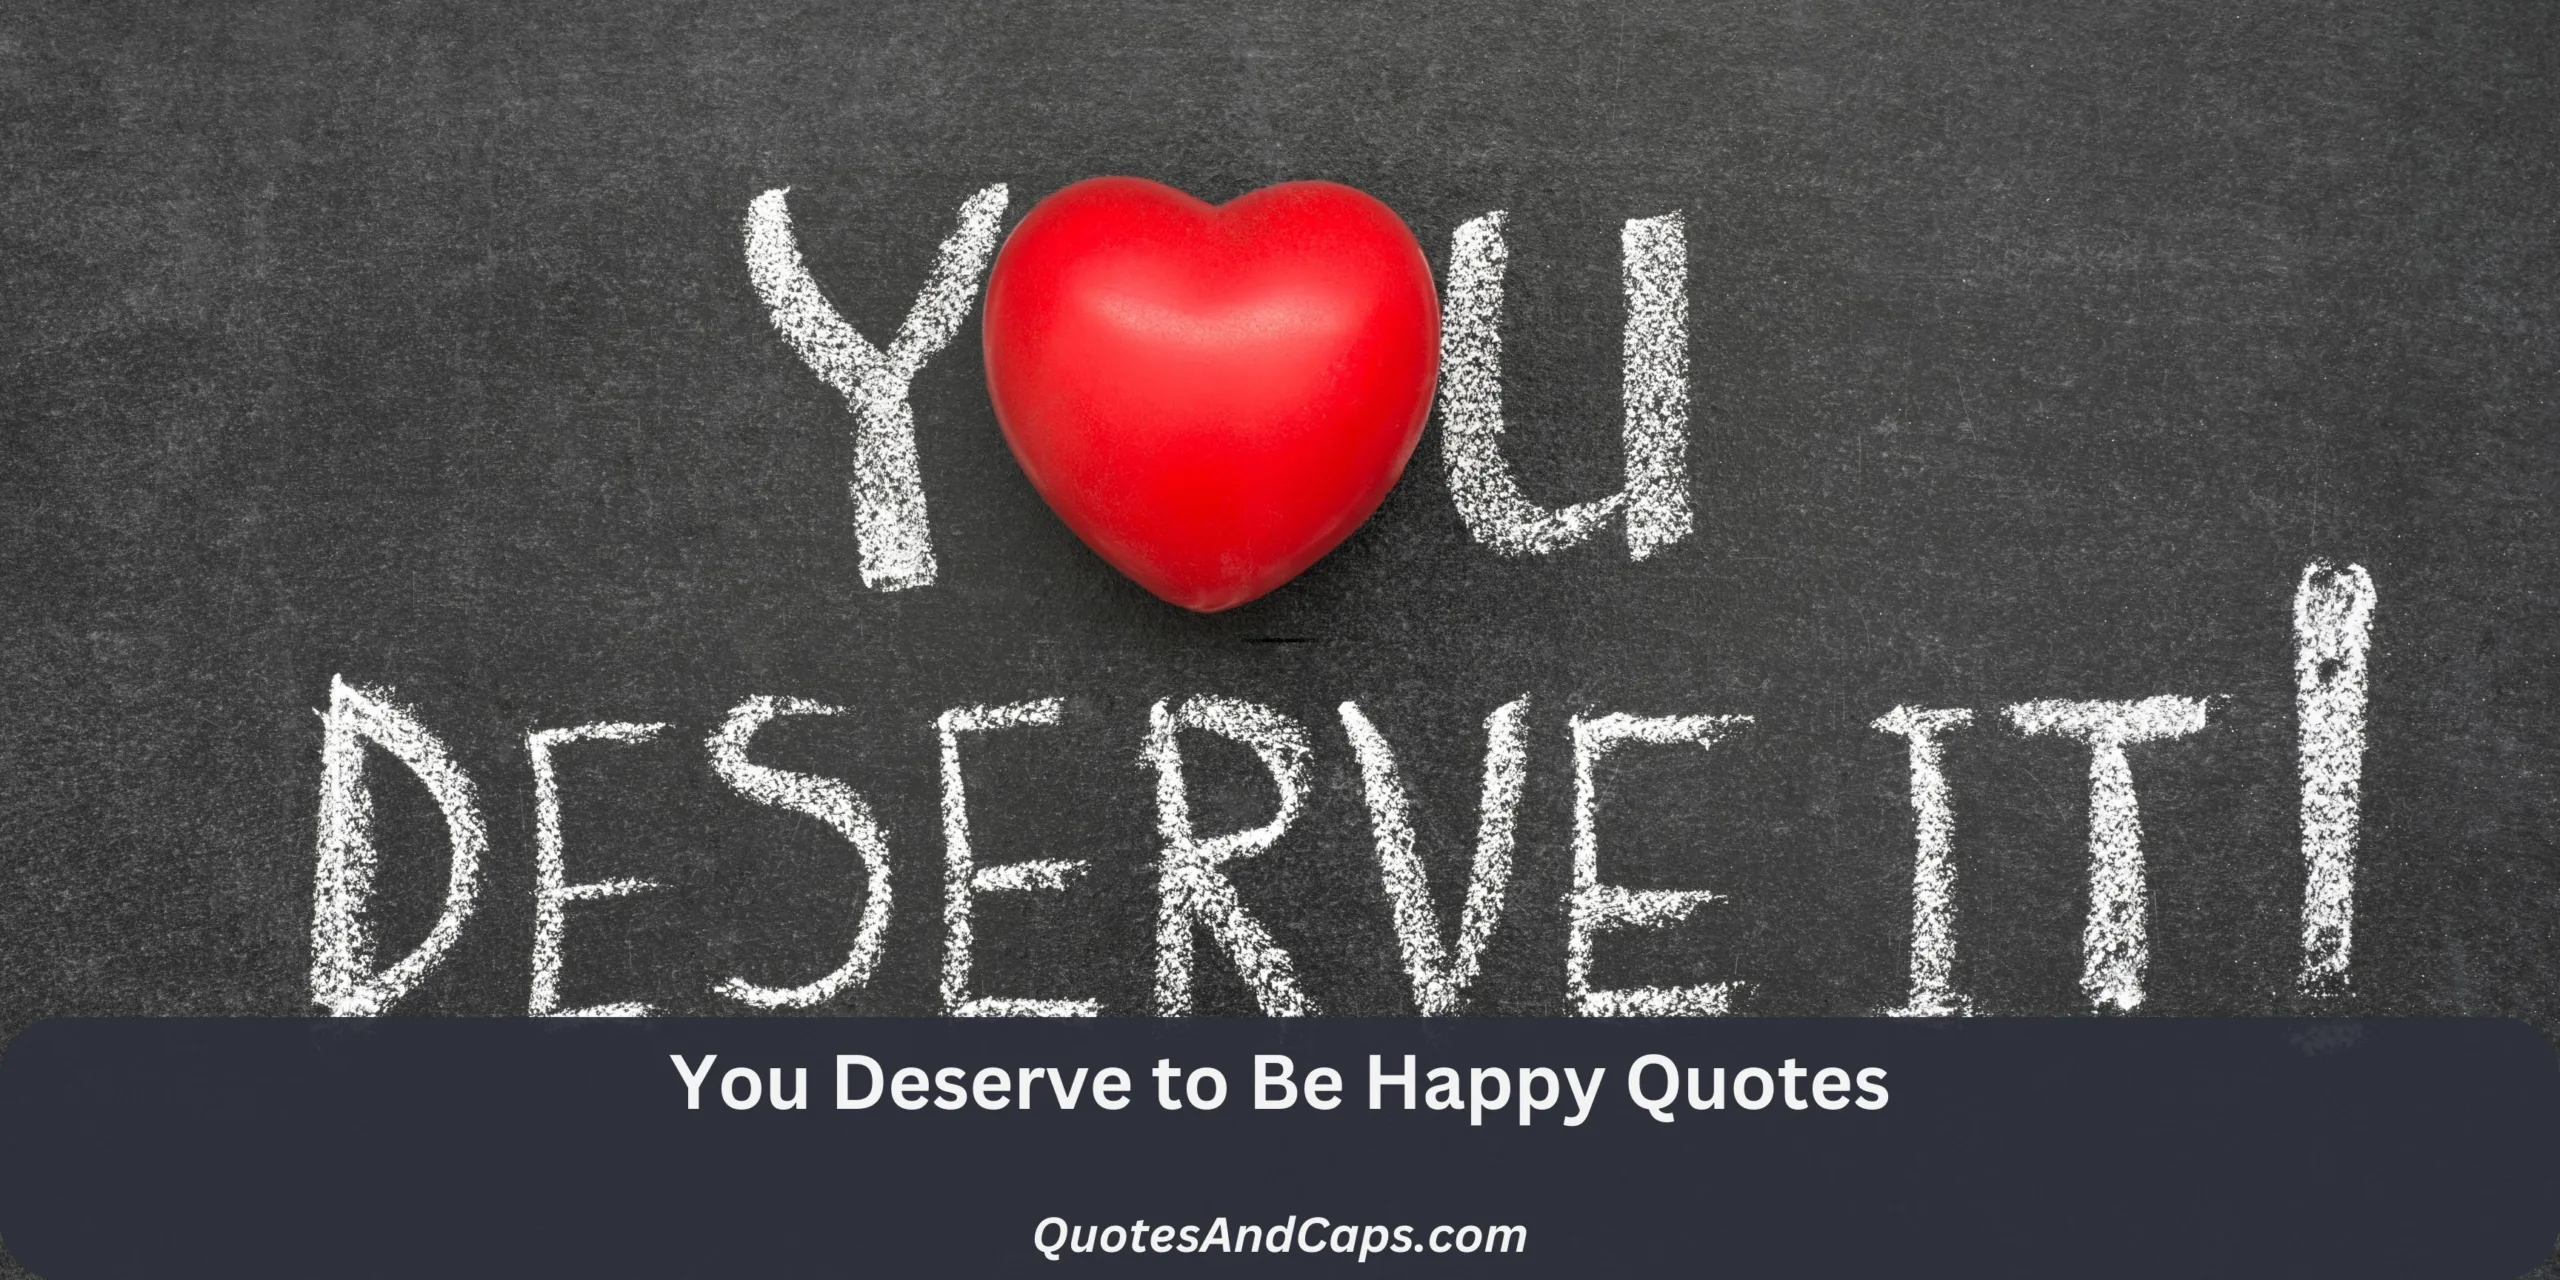 You Deserve to Be Happy Quotes